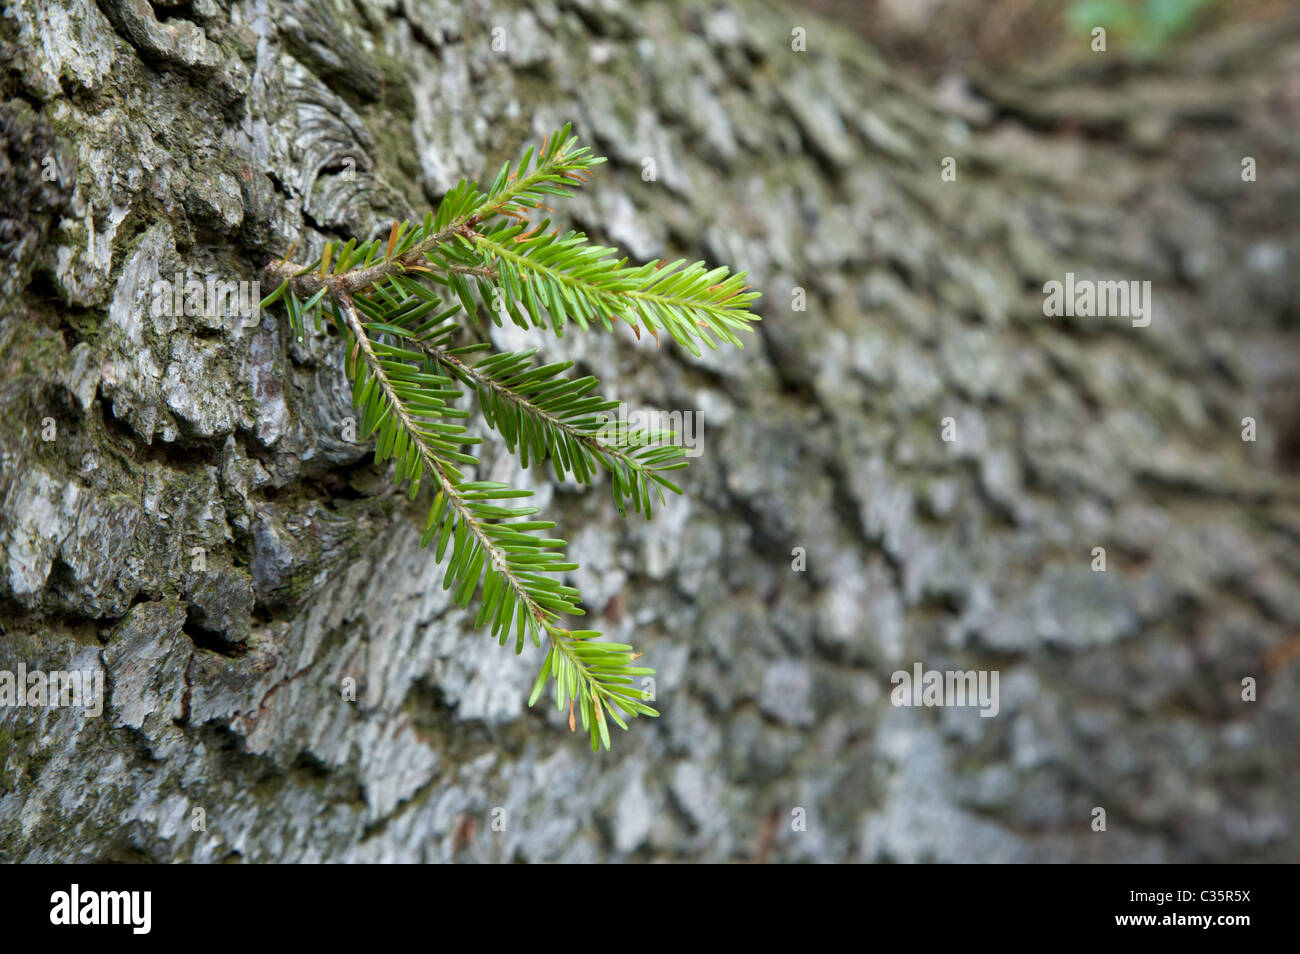 Bud of silver fir, Abies alba, Concei valley, Ledro valley, Trentino Alto Adige, Italy, Europe Stock Photo